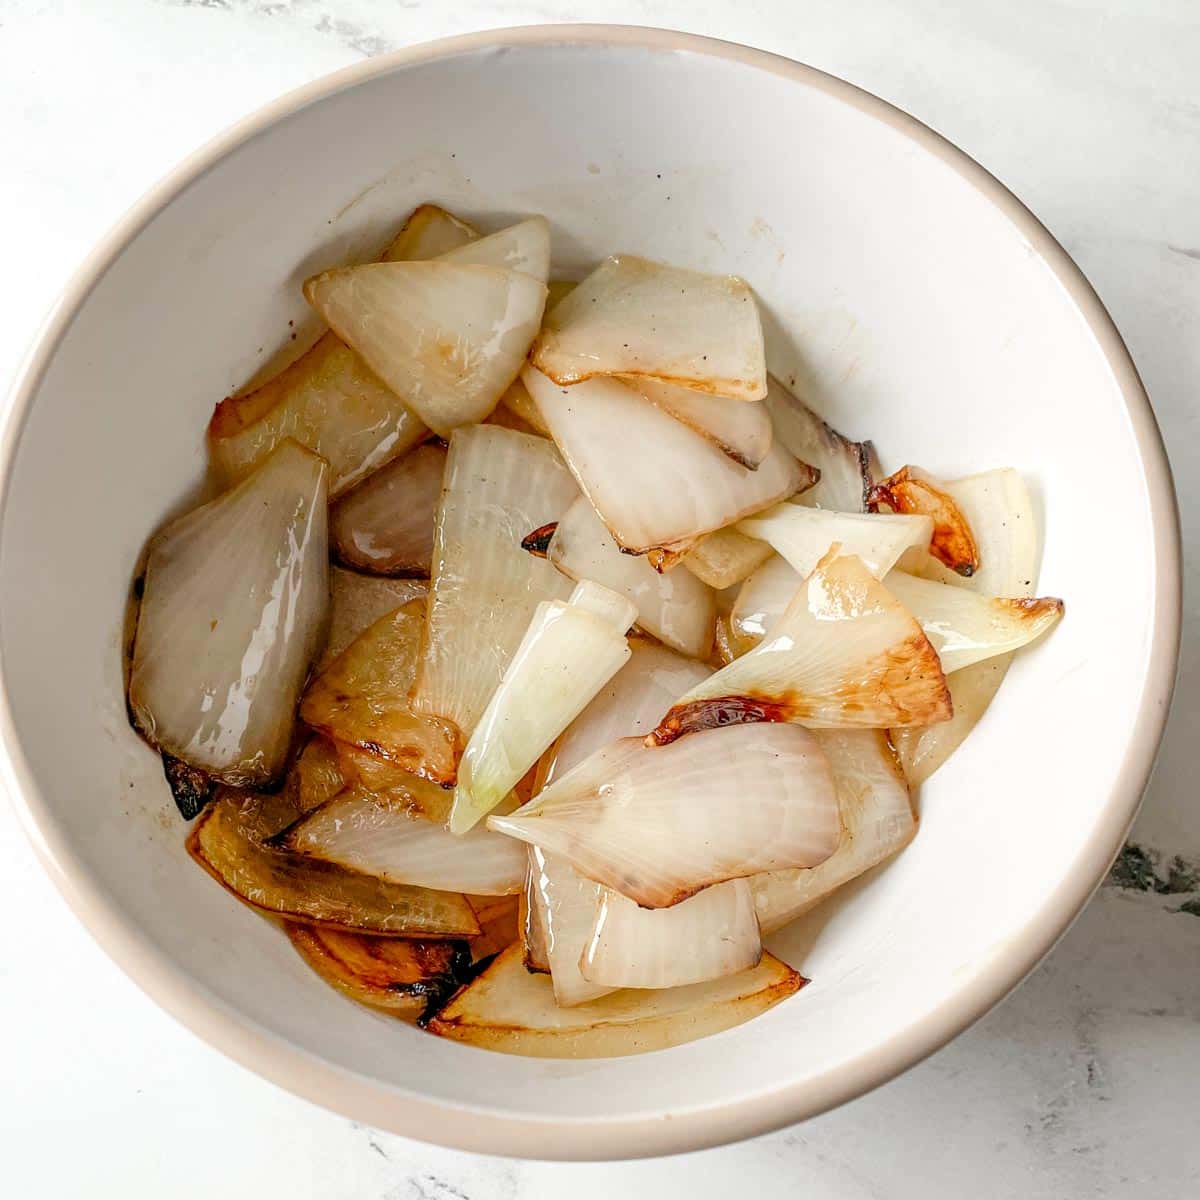 Cooked onions are shown in a white bowl.